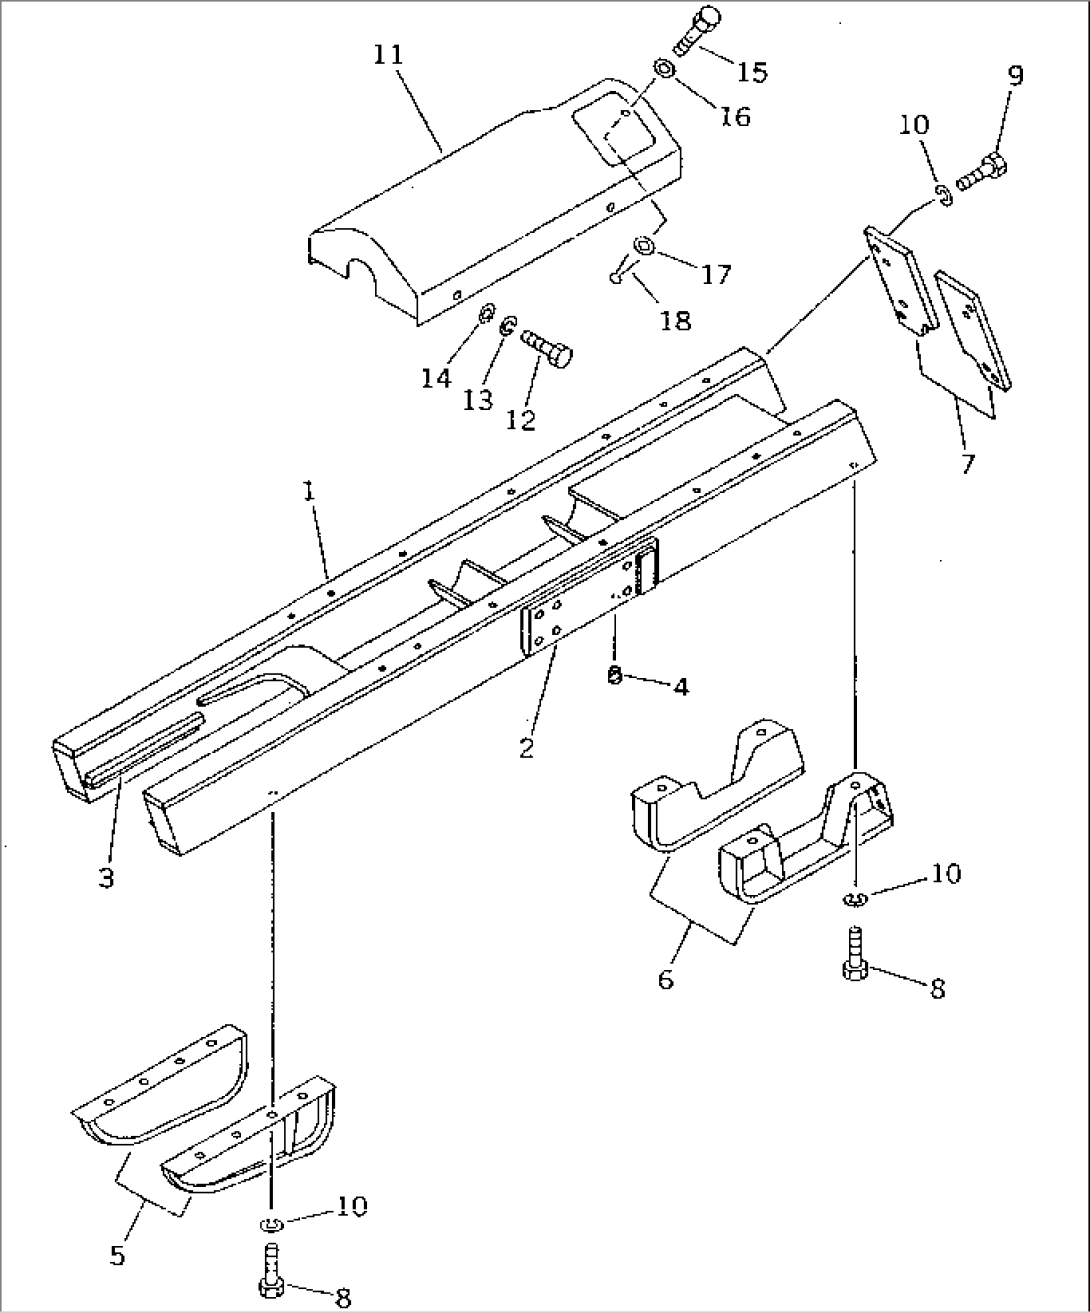 TRACK FRAME (WITH SEPARATE TYPE GUARD) (FOR ANGLE DOZER)